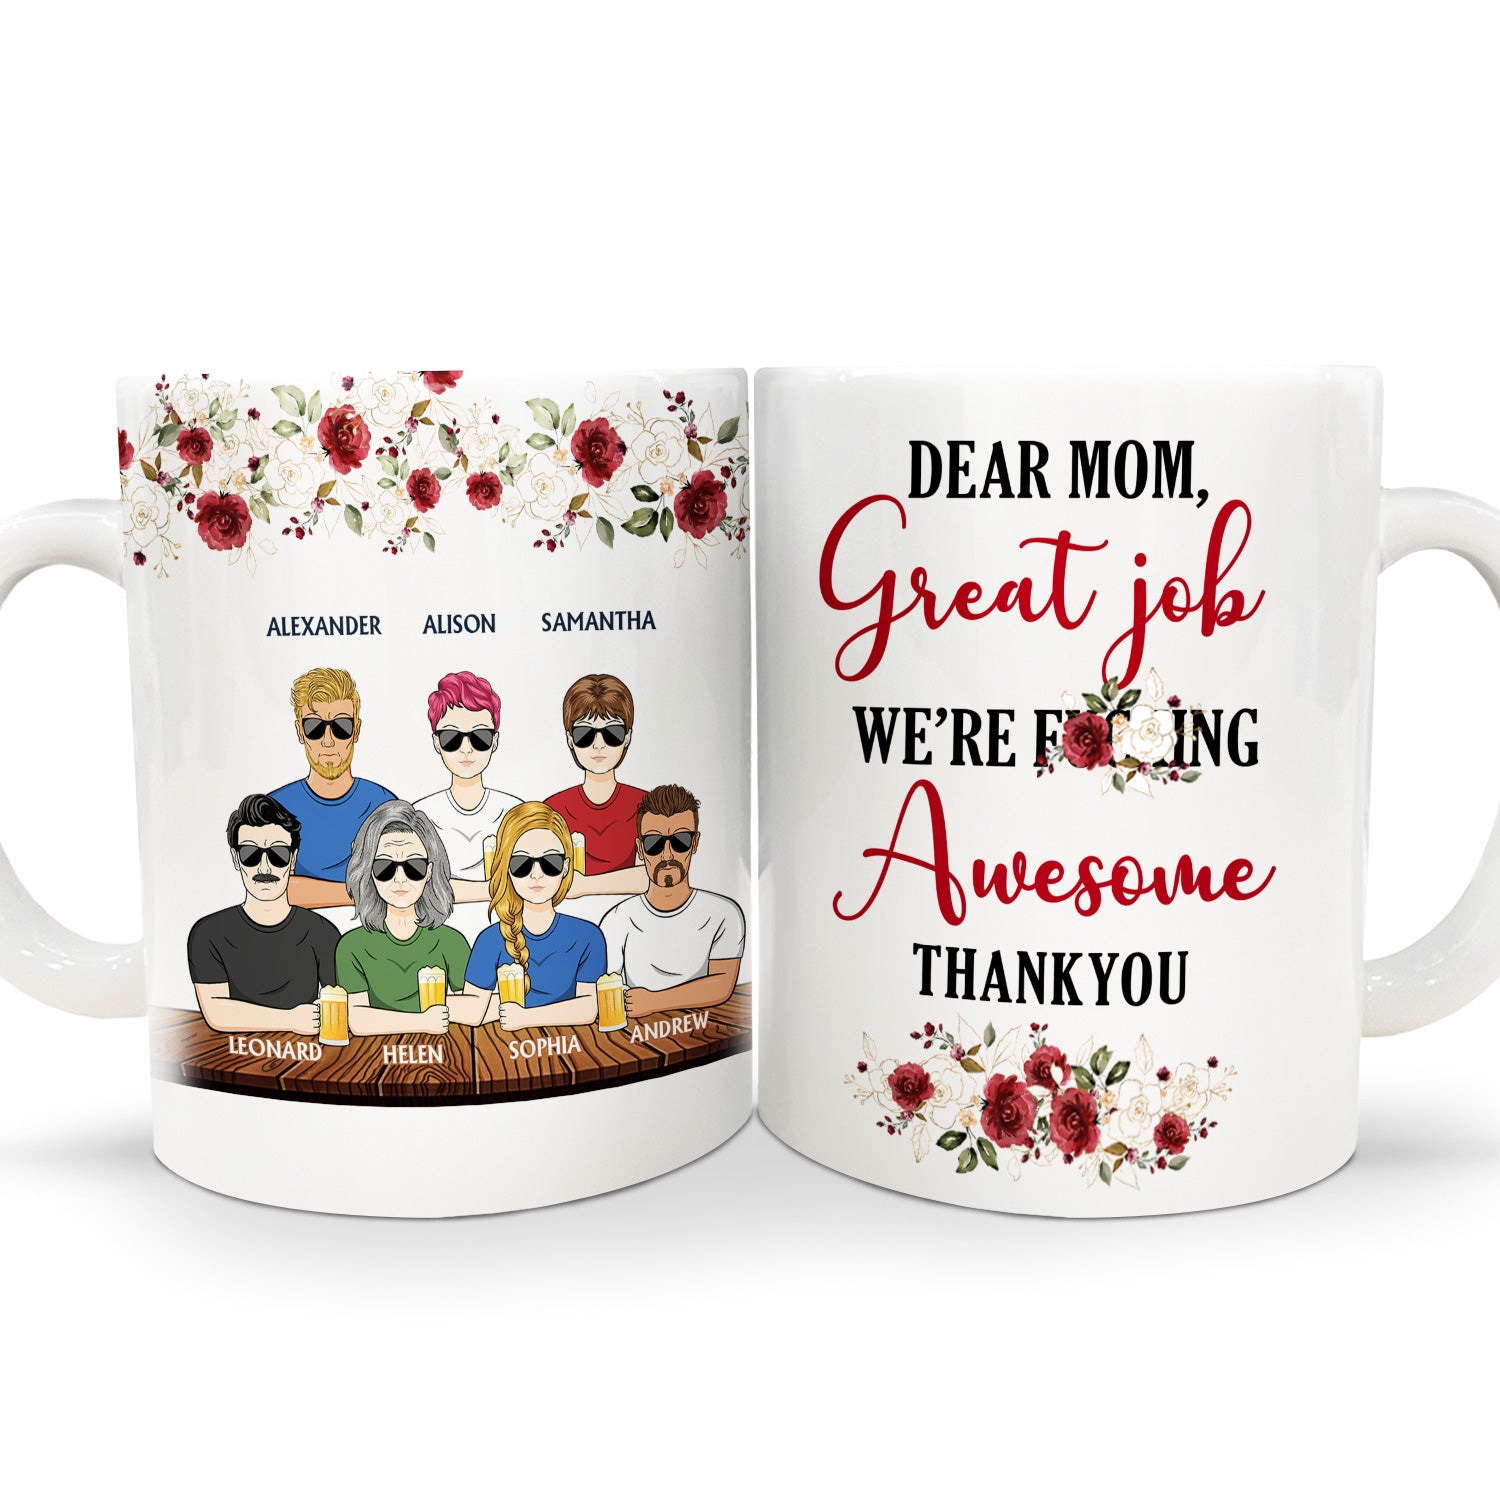 Great Job We're Awesome - Funny Gift For Mother, Mom - Personalized White Edge-to-Edge Mug